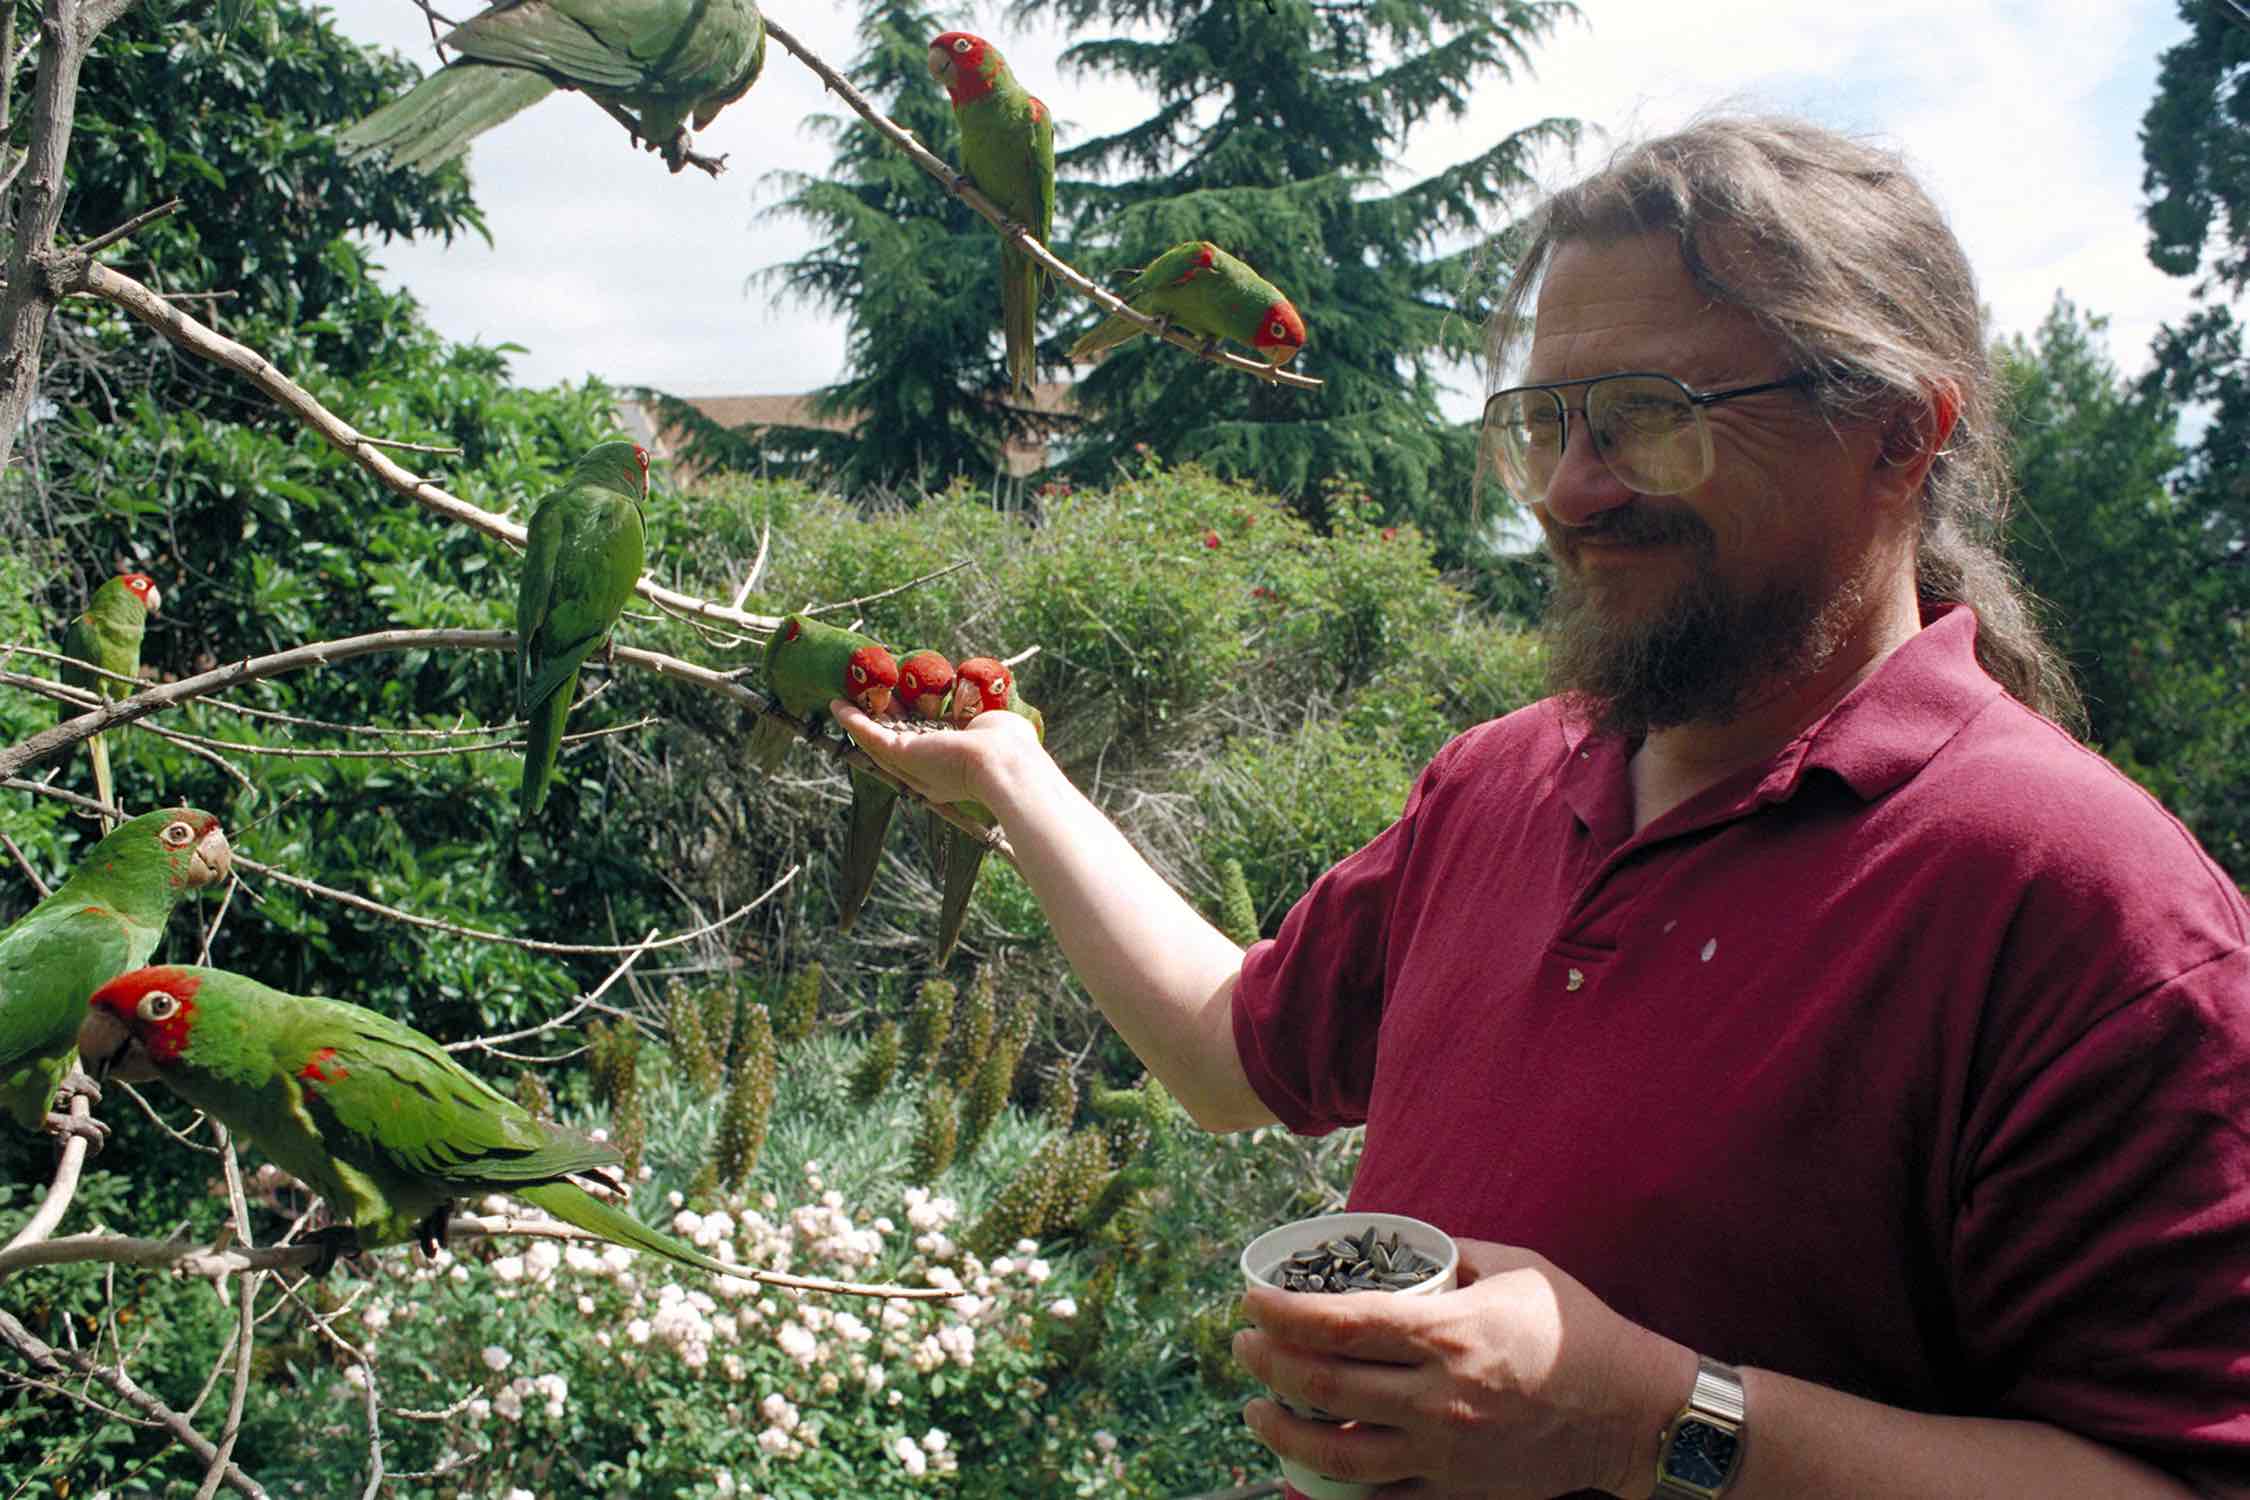 A man with beard & glasses holds a cup of bird seed in one hand while feeding 3 parrots on a tree eat seed from his other.